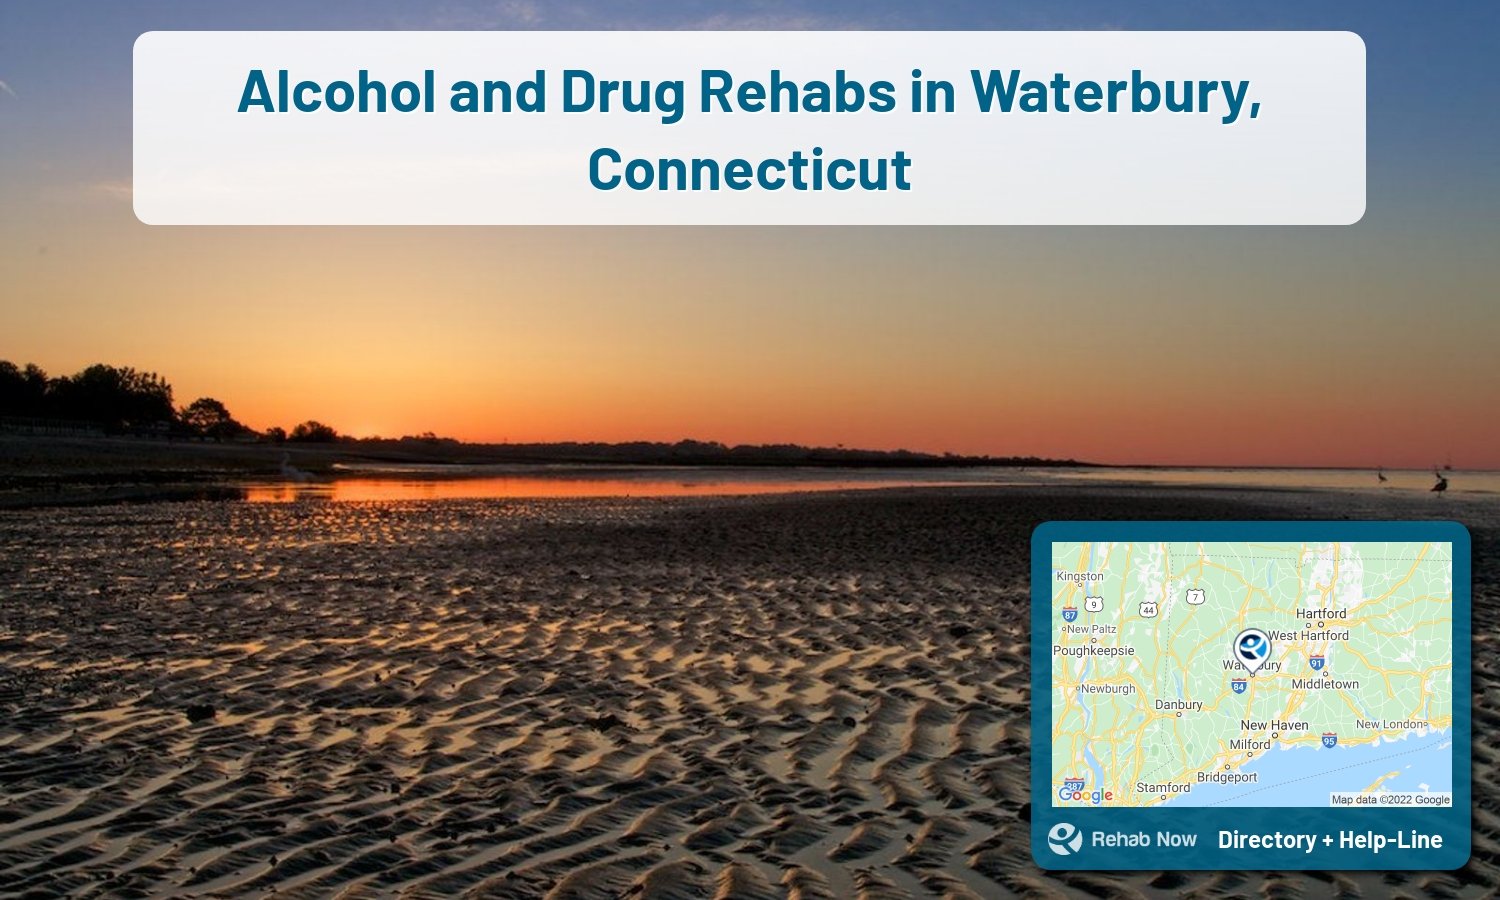 Ready to pick a rehab center in Waterbury? Get off alcohol, opiates, and other drugs, by selecting top drug rehab centers in Connecticut